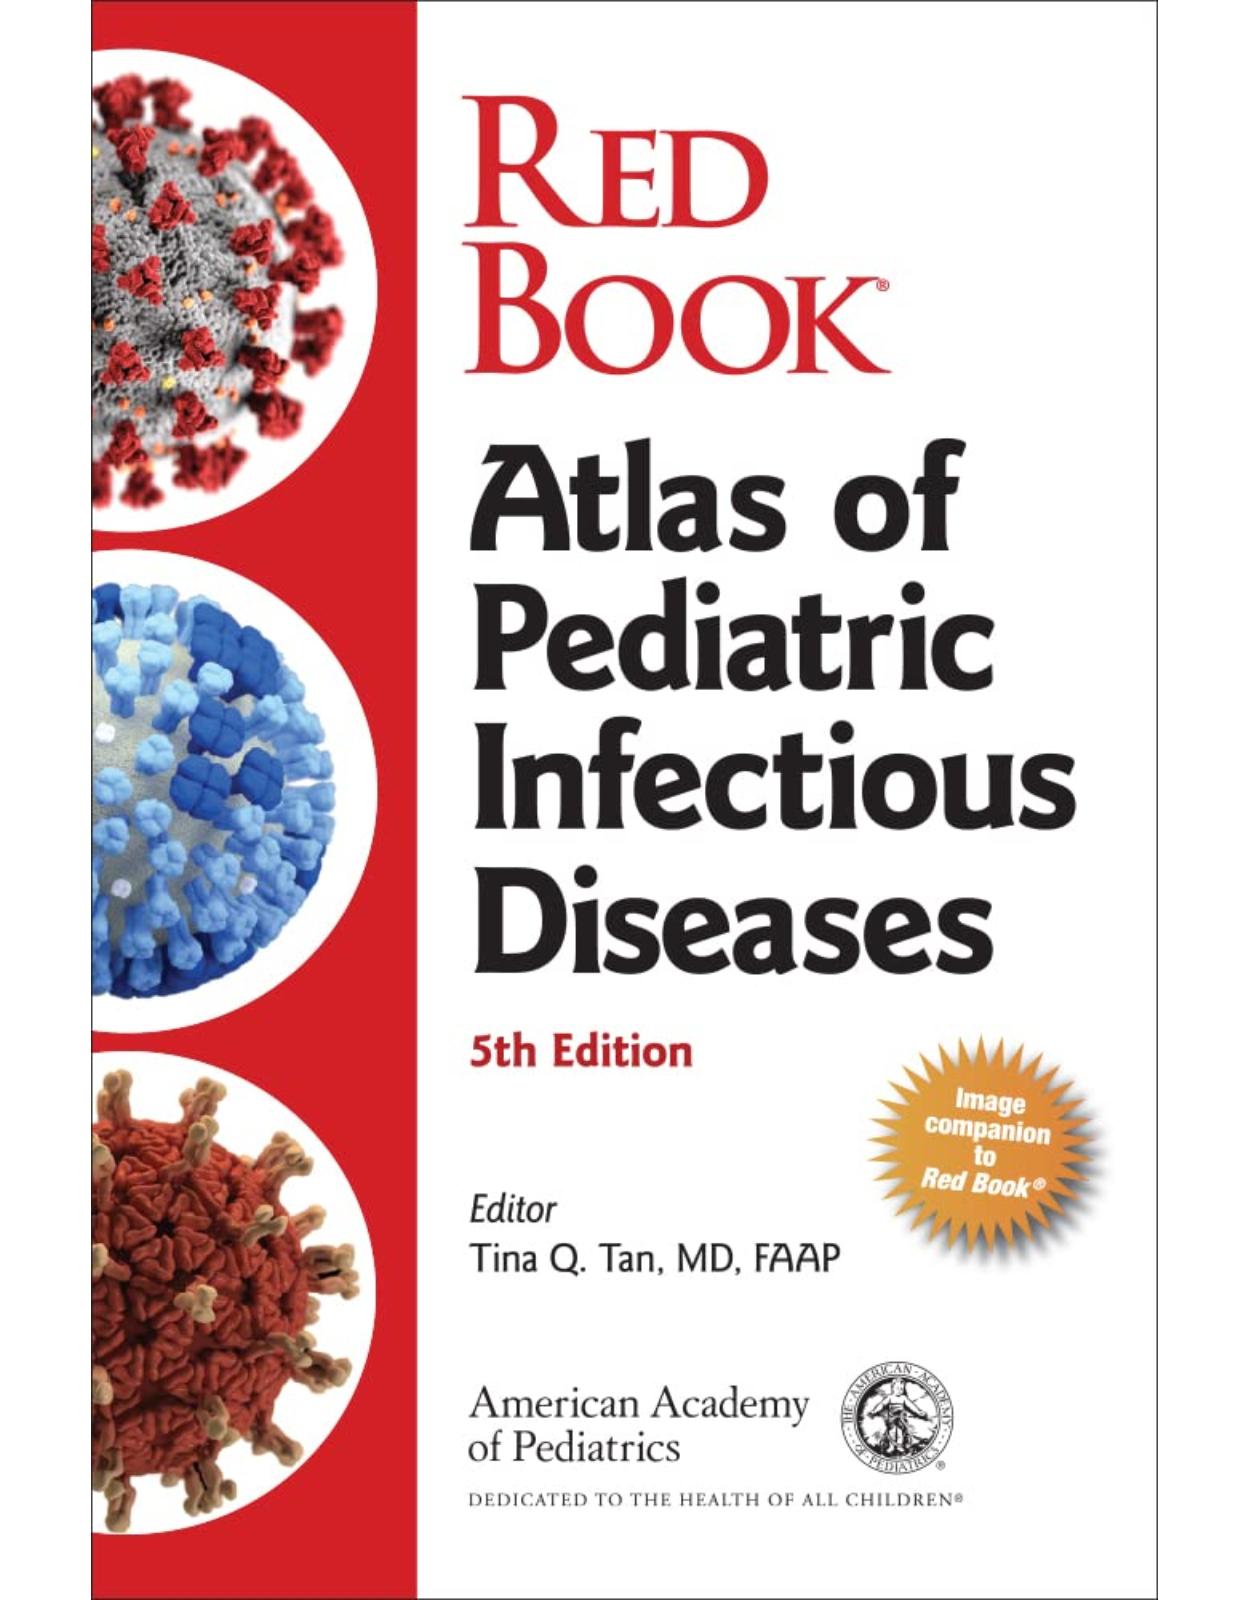 Red Book Atlas of Pediatric Infectious Diseases, 4th Edition 